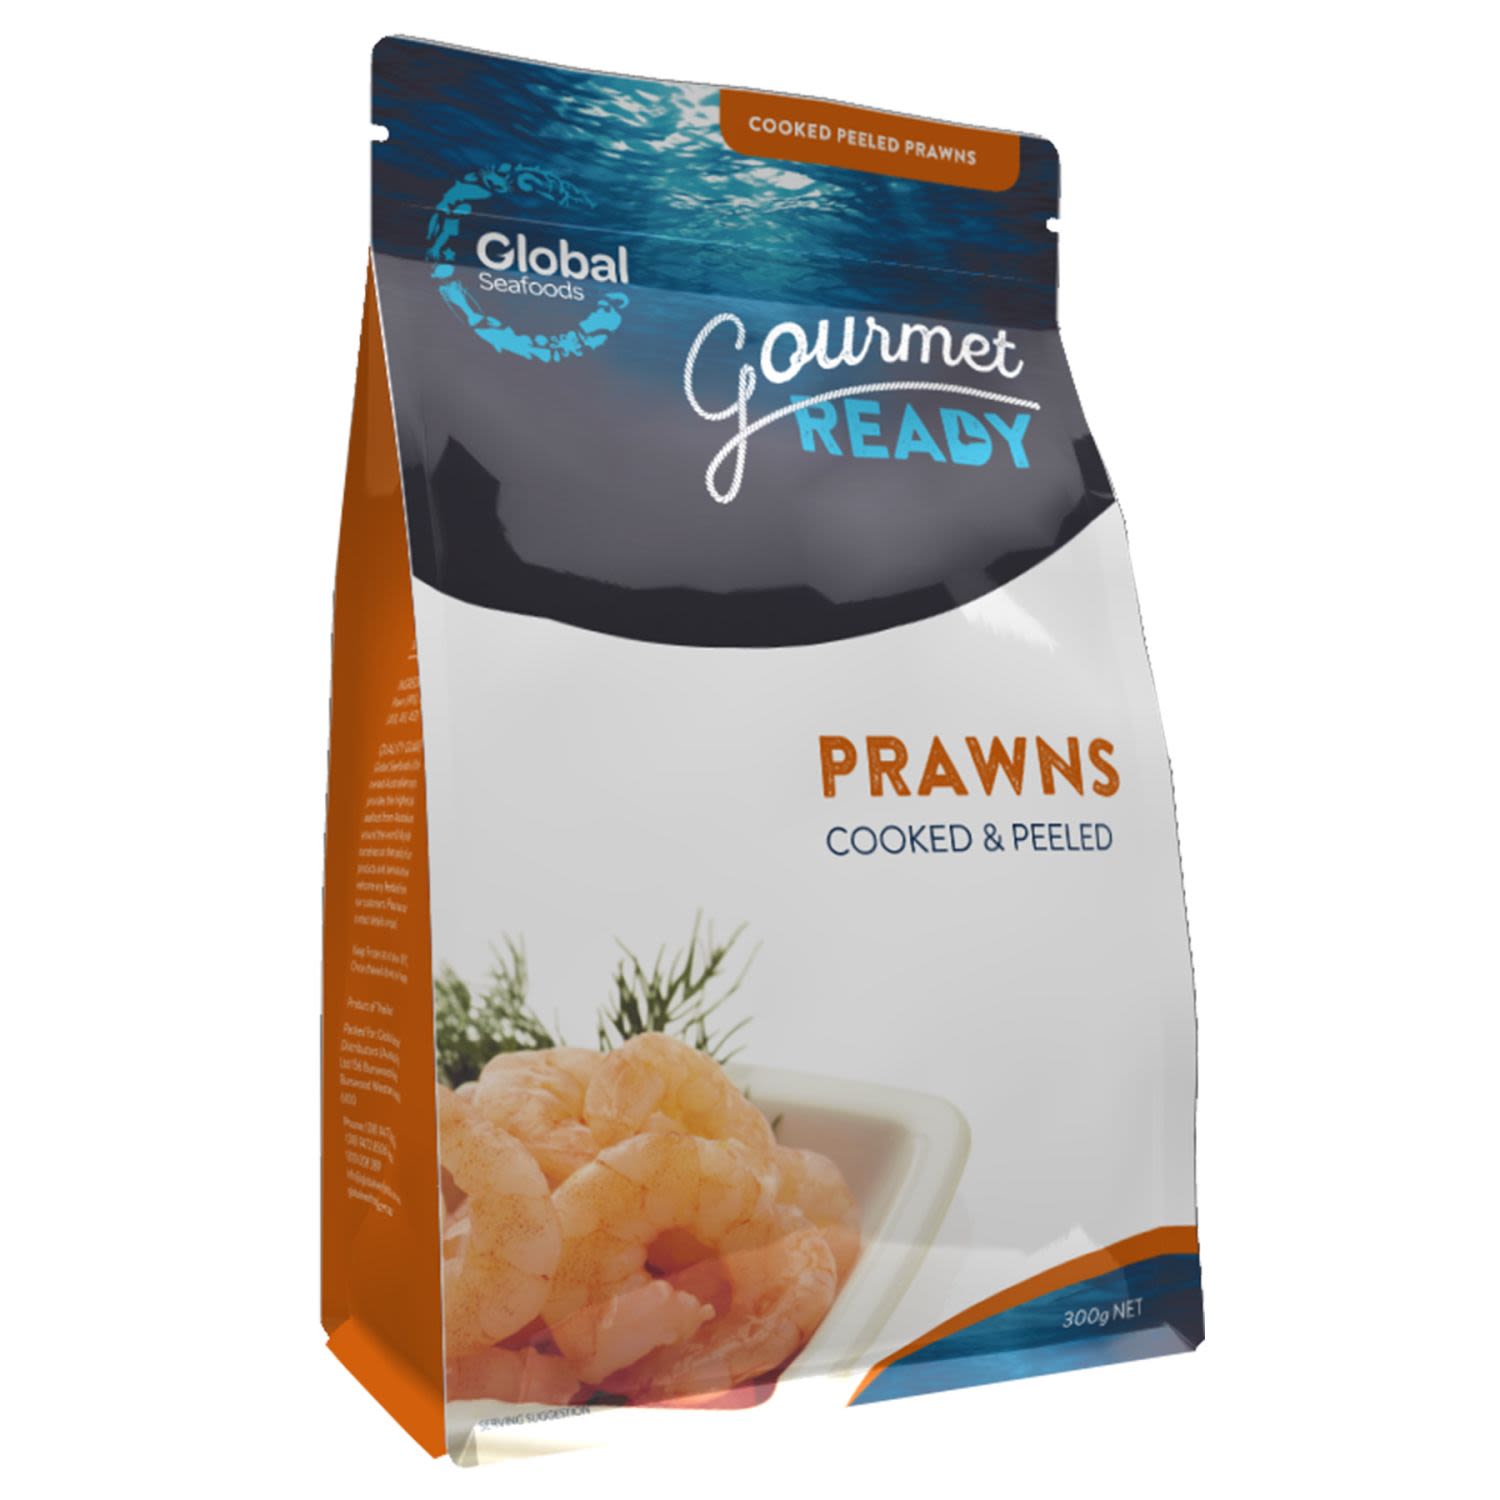 Global Seafoods Gourmet Ready Prawns Cooked & Peeled, 300 Gram